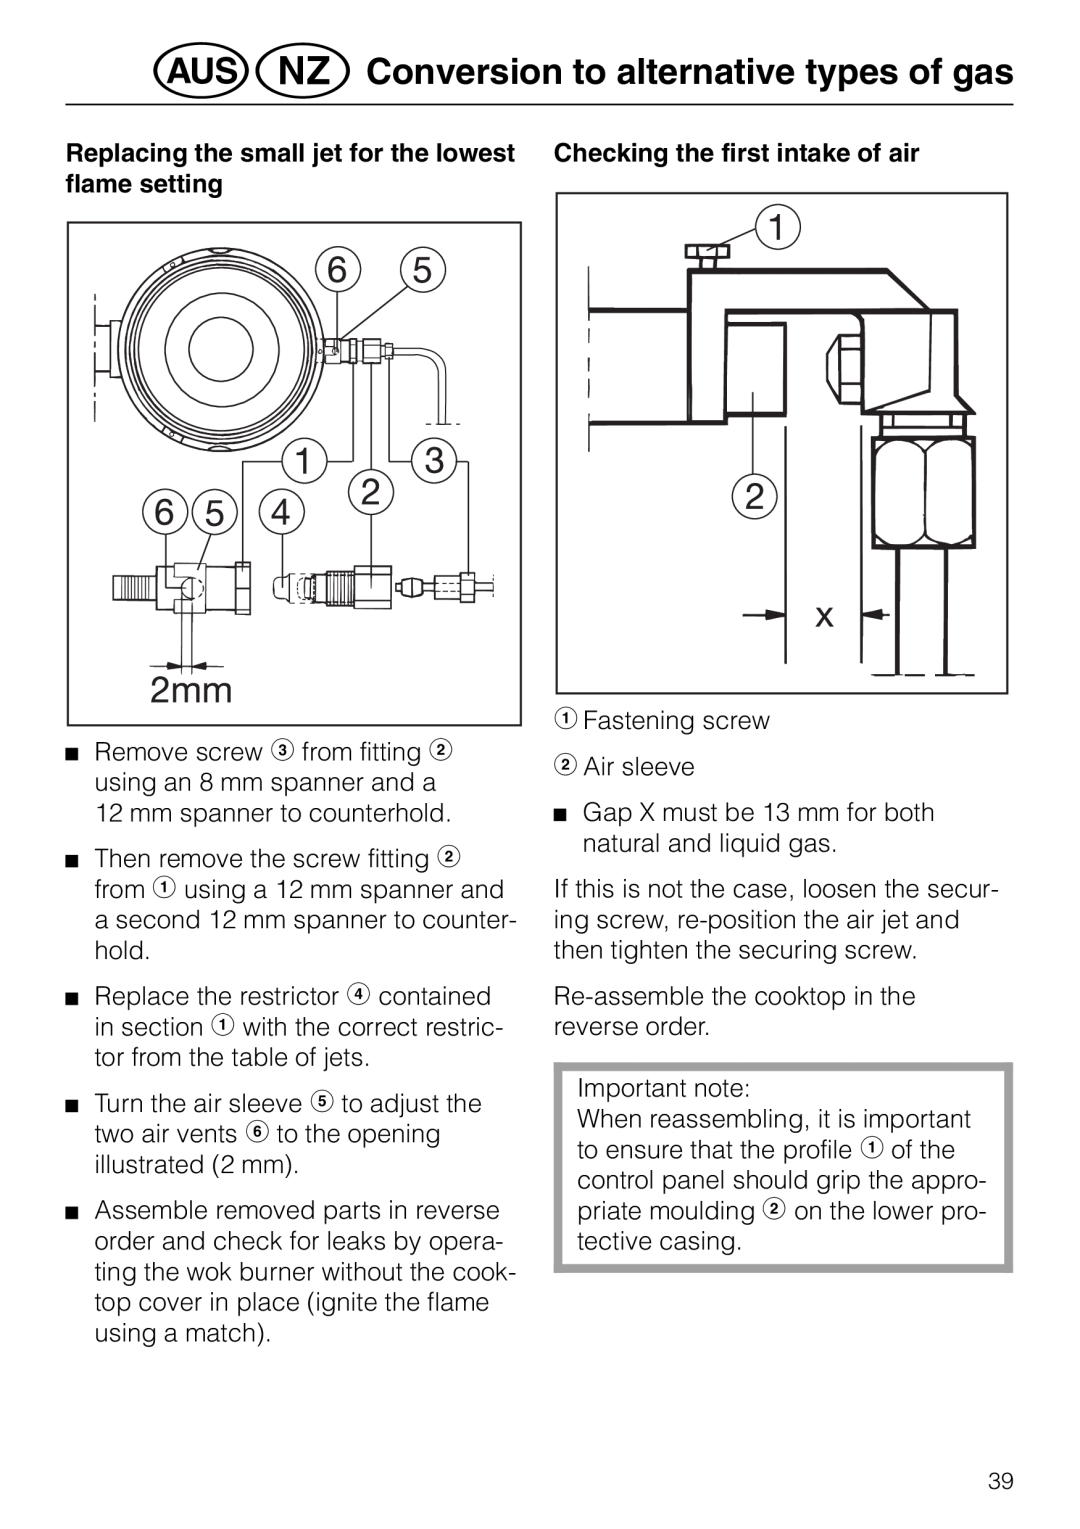 Miele KM 81-2 operating instructions @äConversion to alternative types of gas, bFastening screw cAir sleeve 